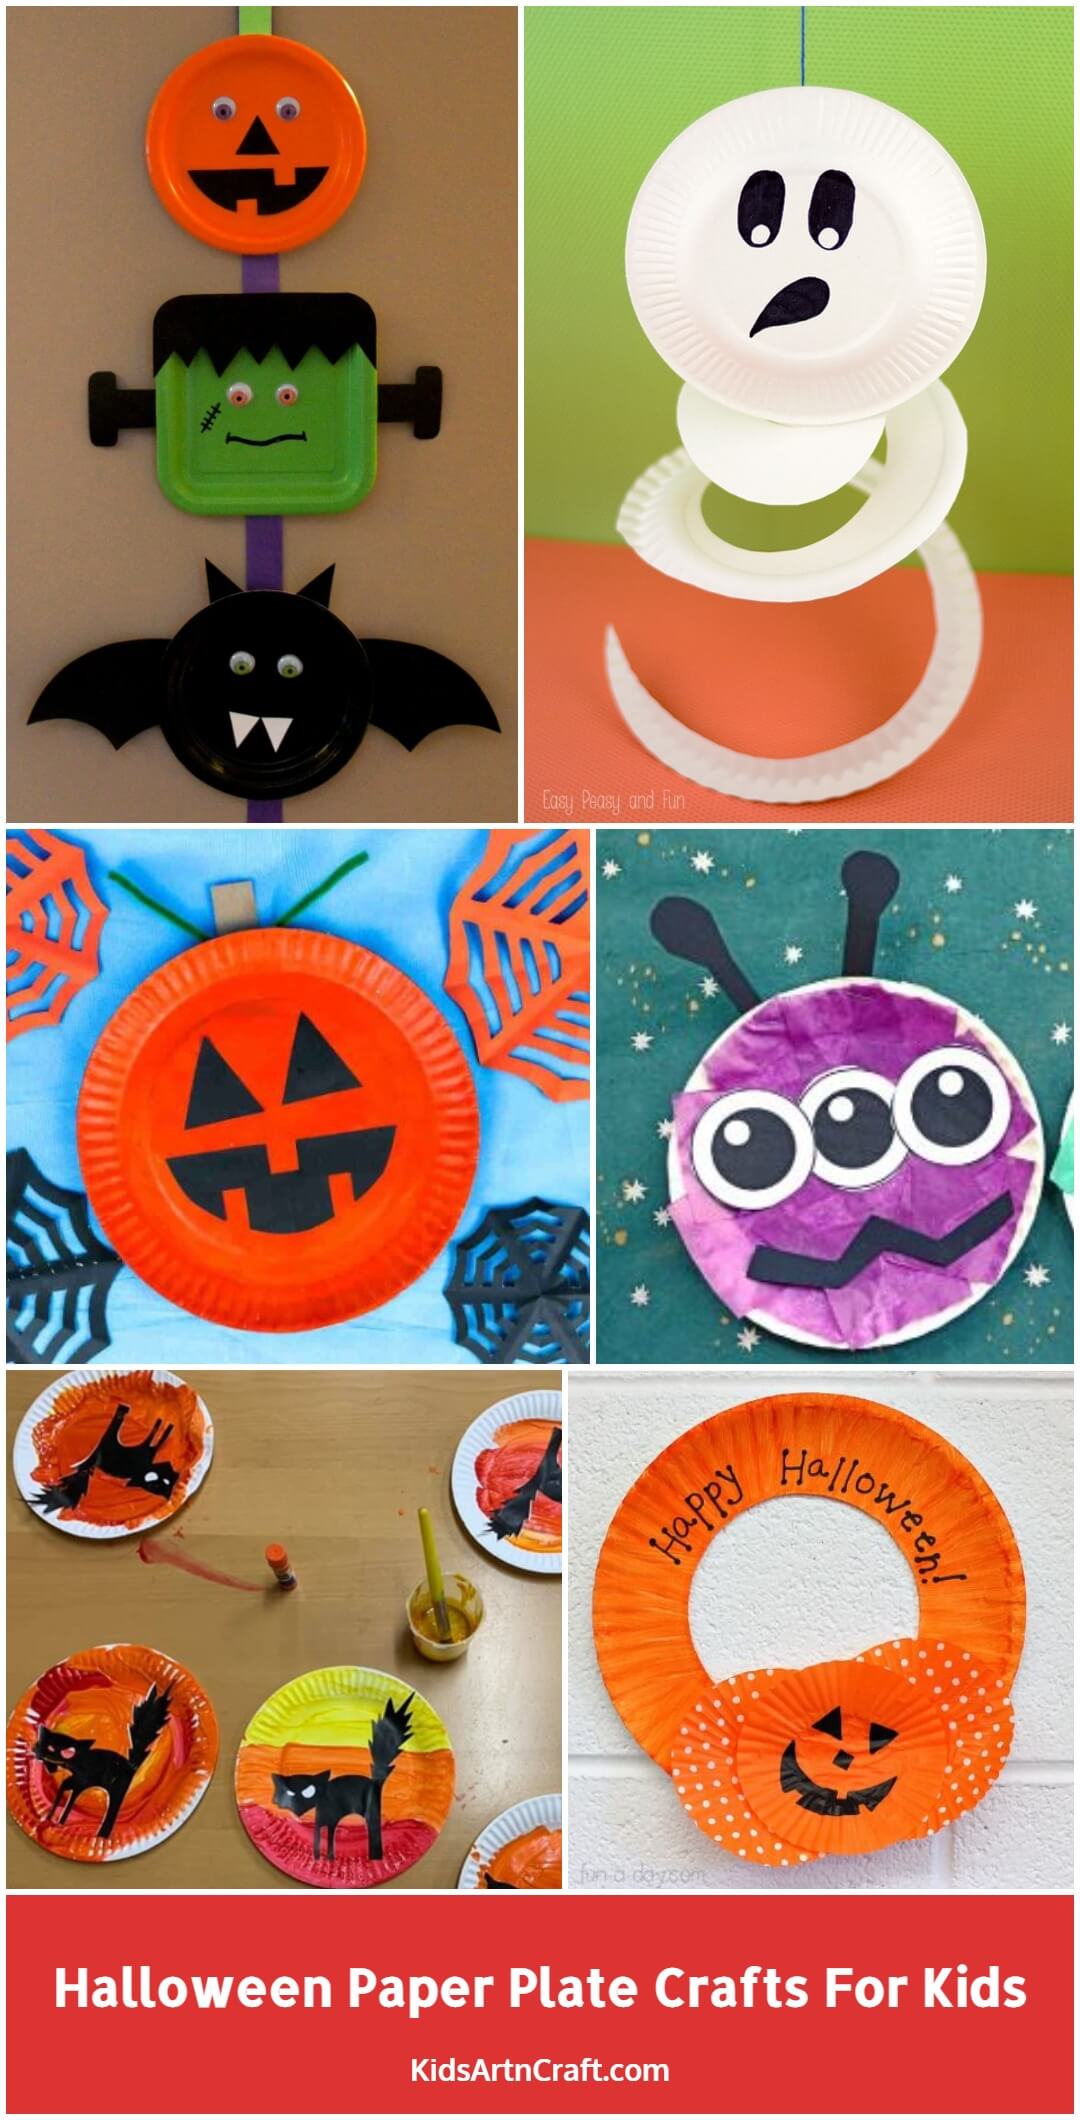 Halloween Paper Plate Crafts for Kids